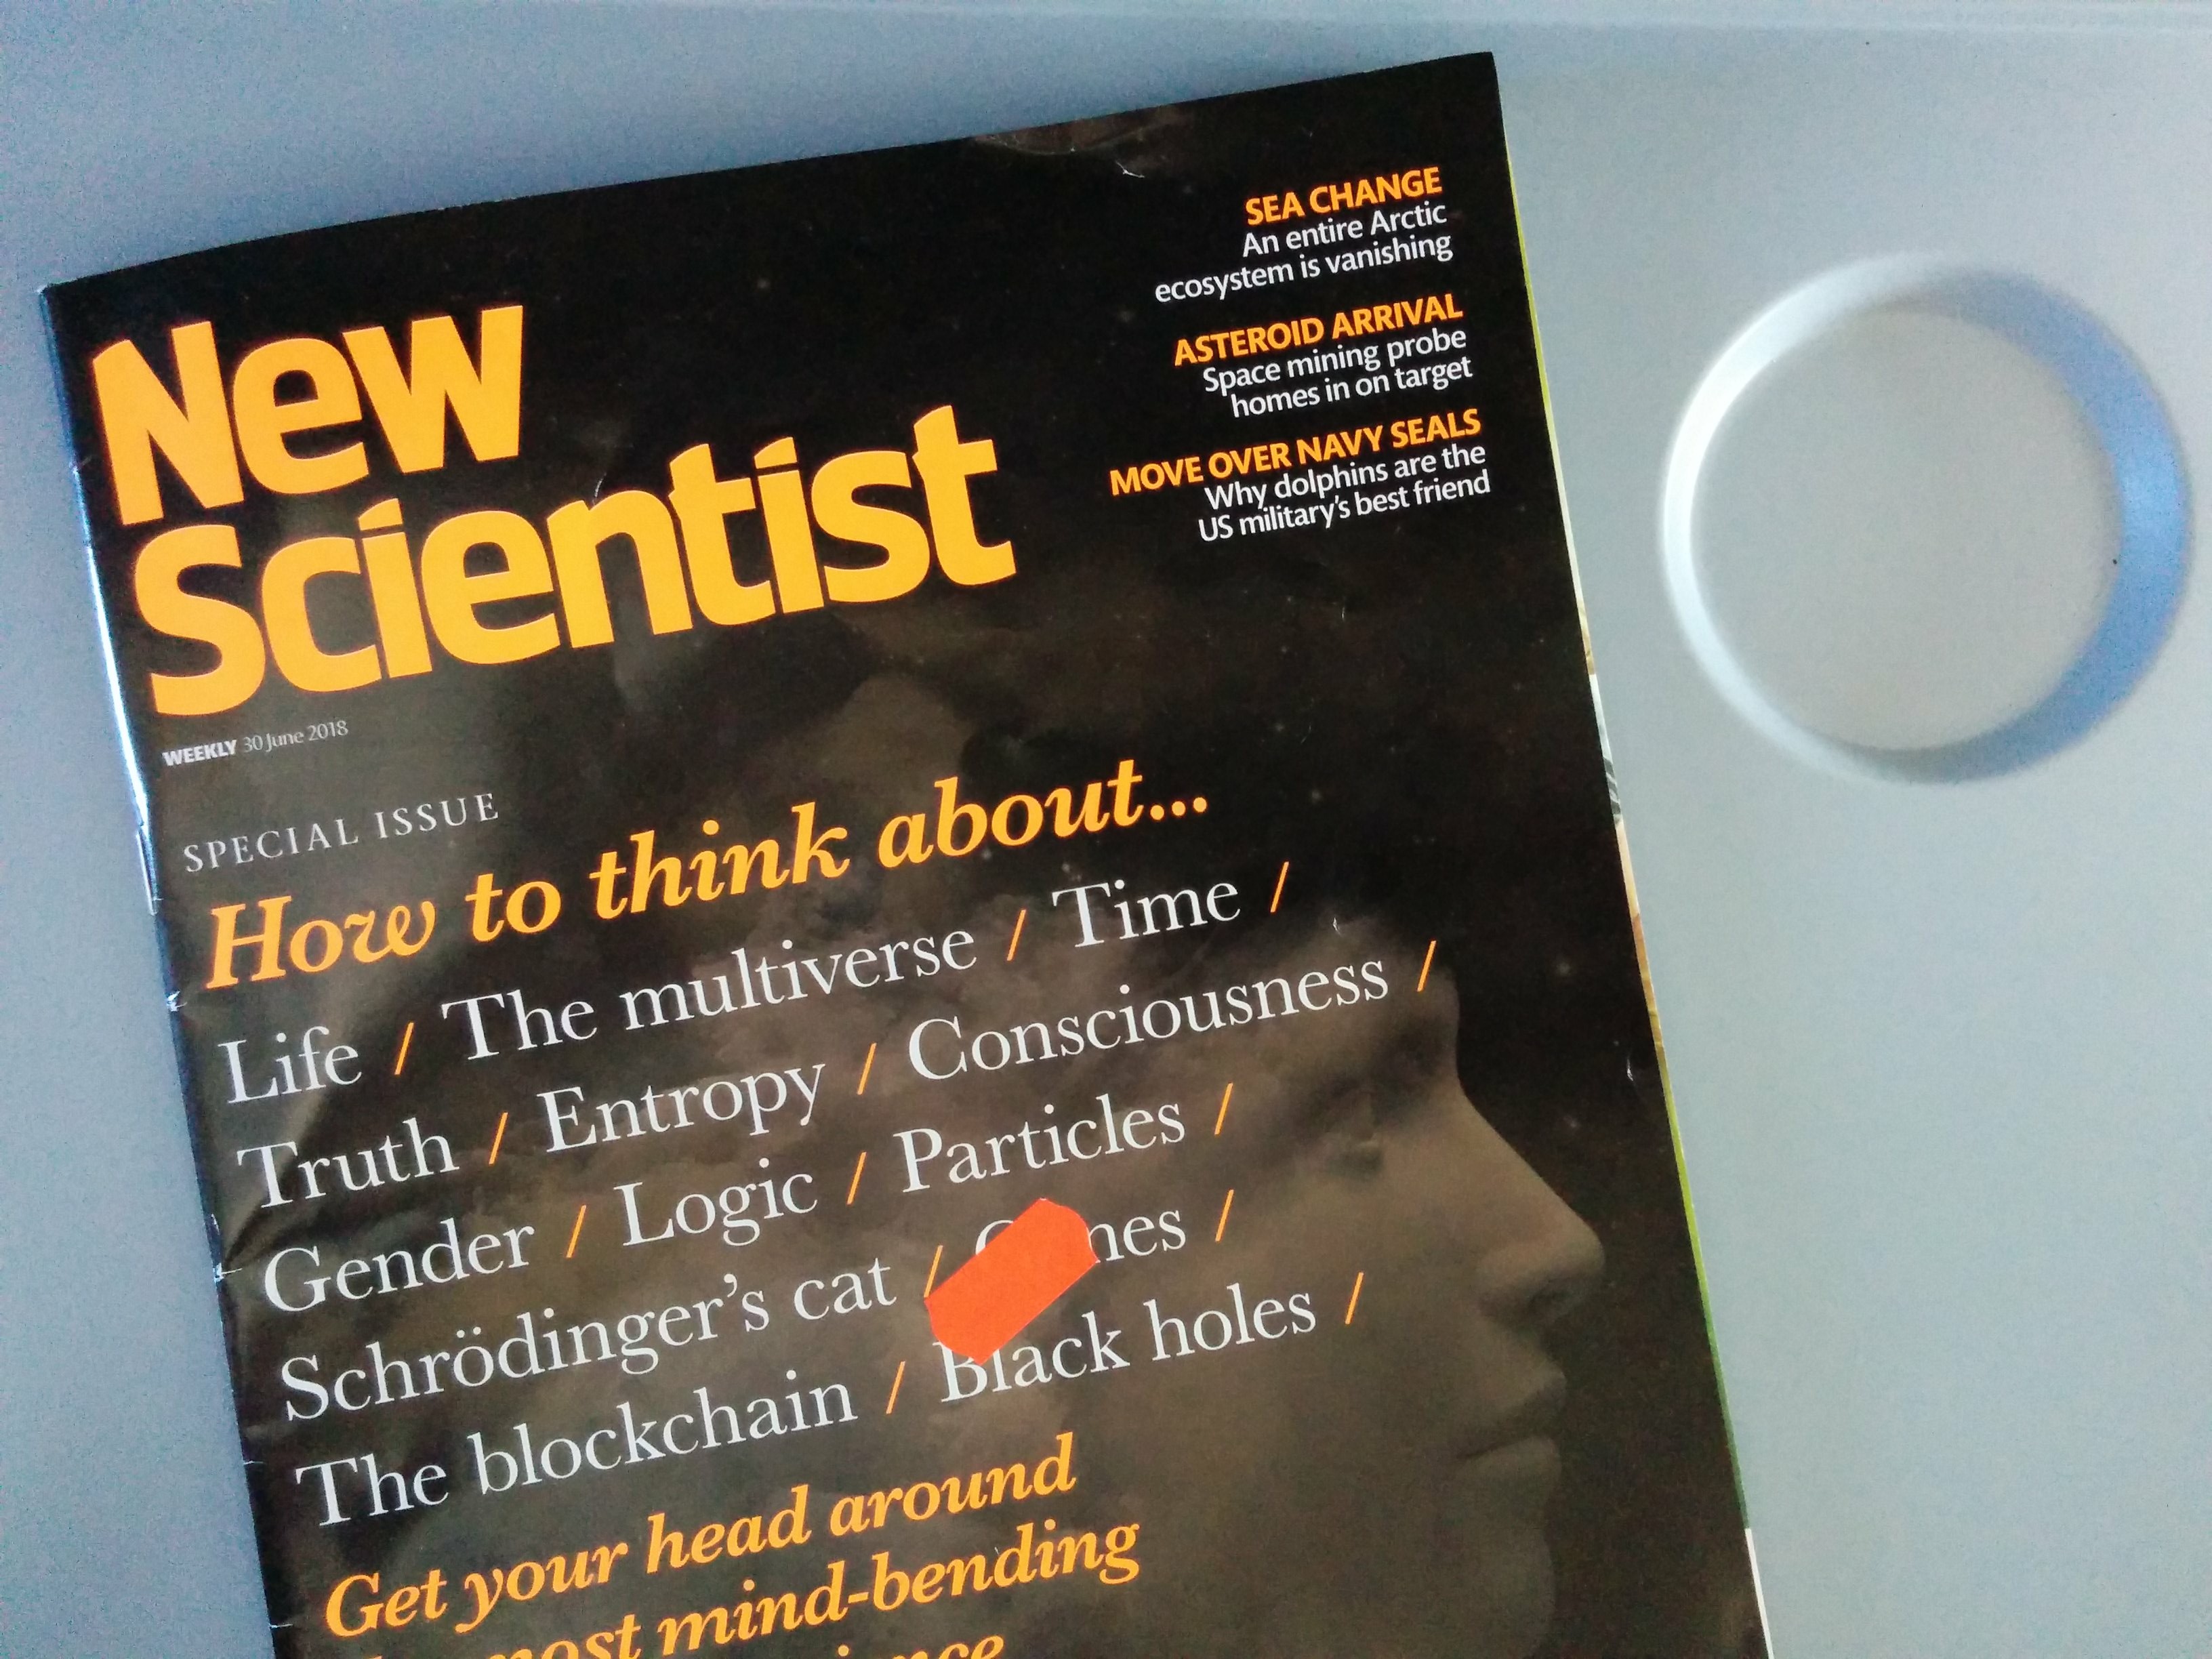 New Scientist mmagazine on the tray table of my seat